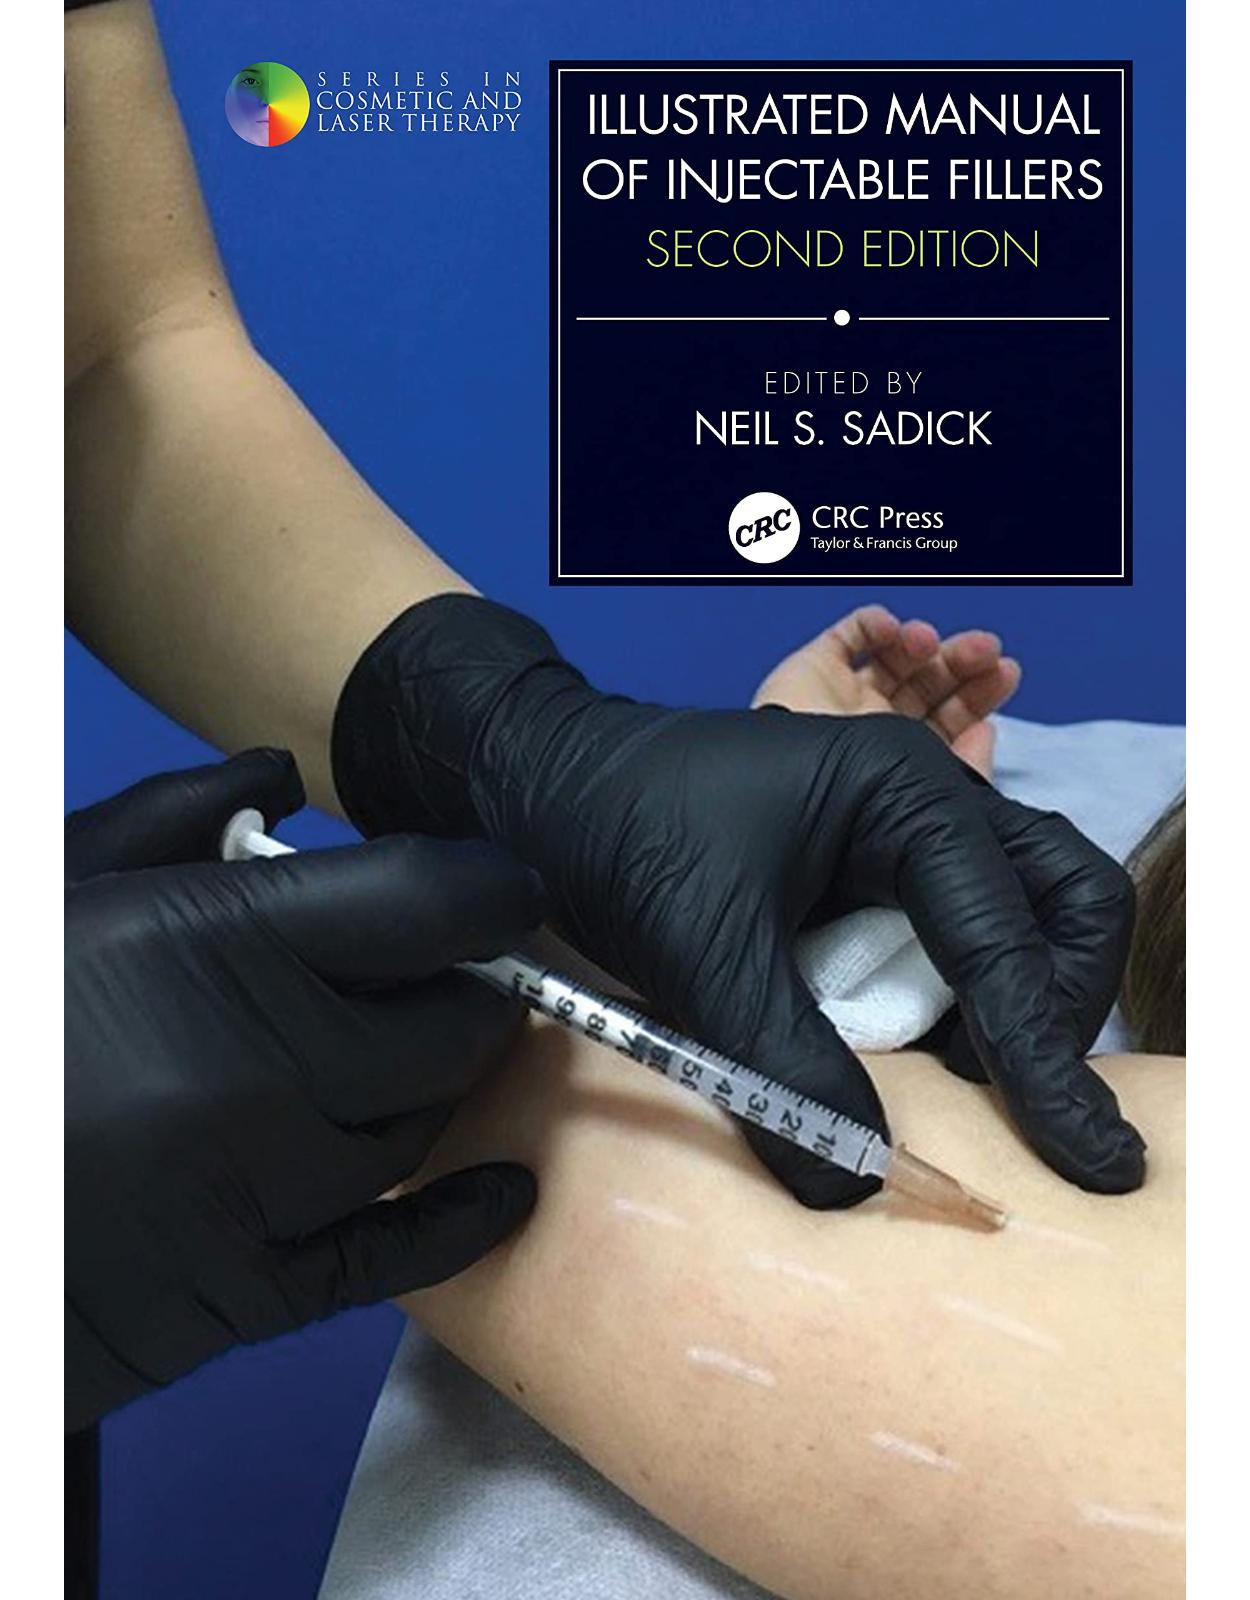 Illustrated Manual of Injectable Fillers (Series in Cosmetic and Laser Therapy)